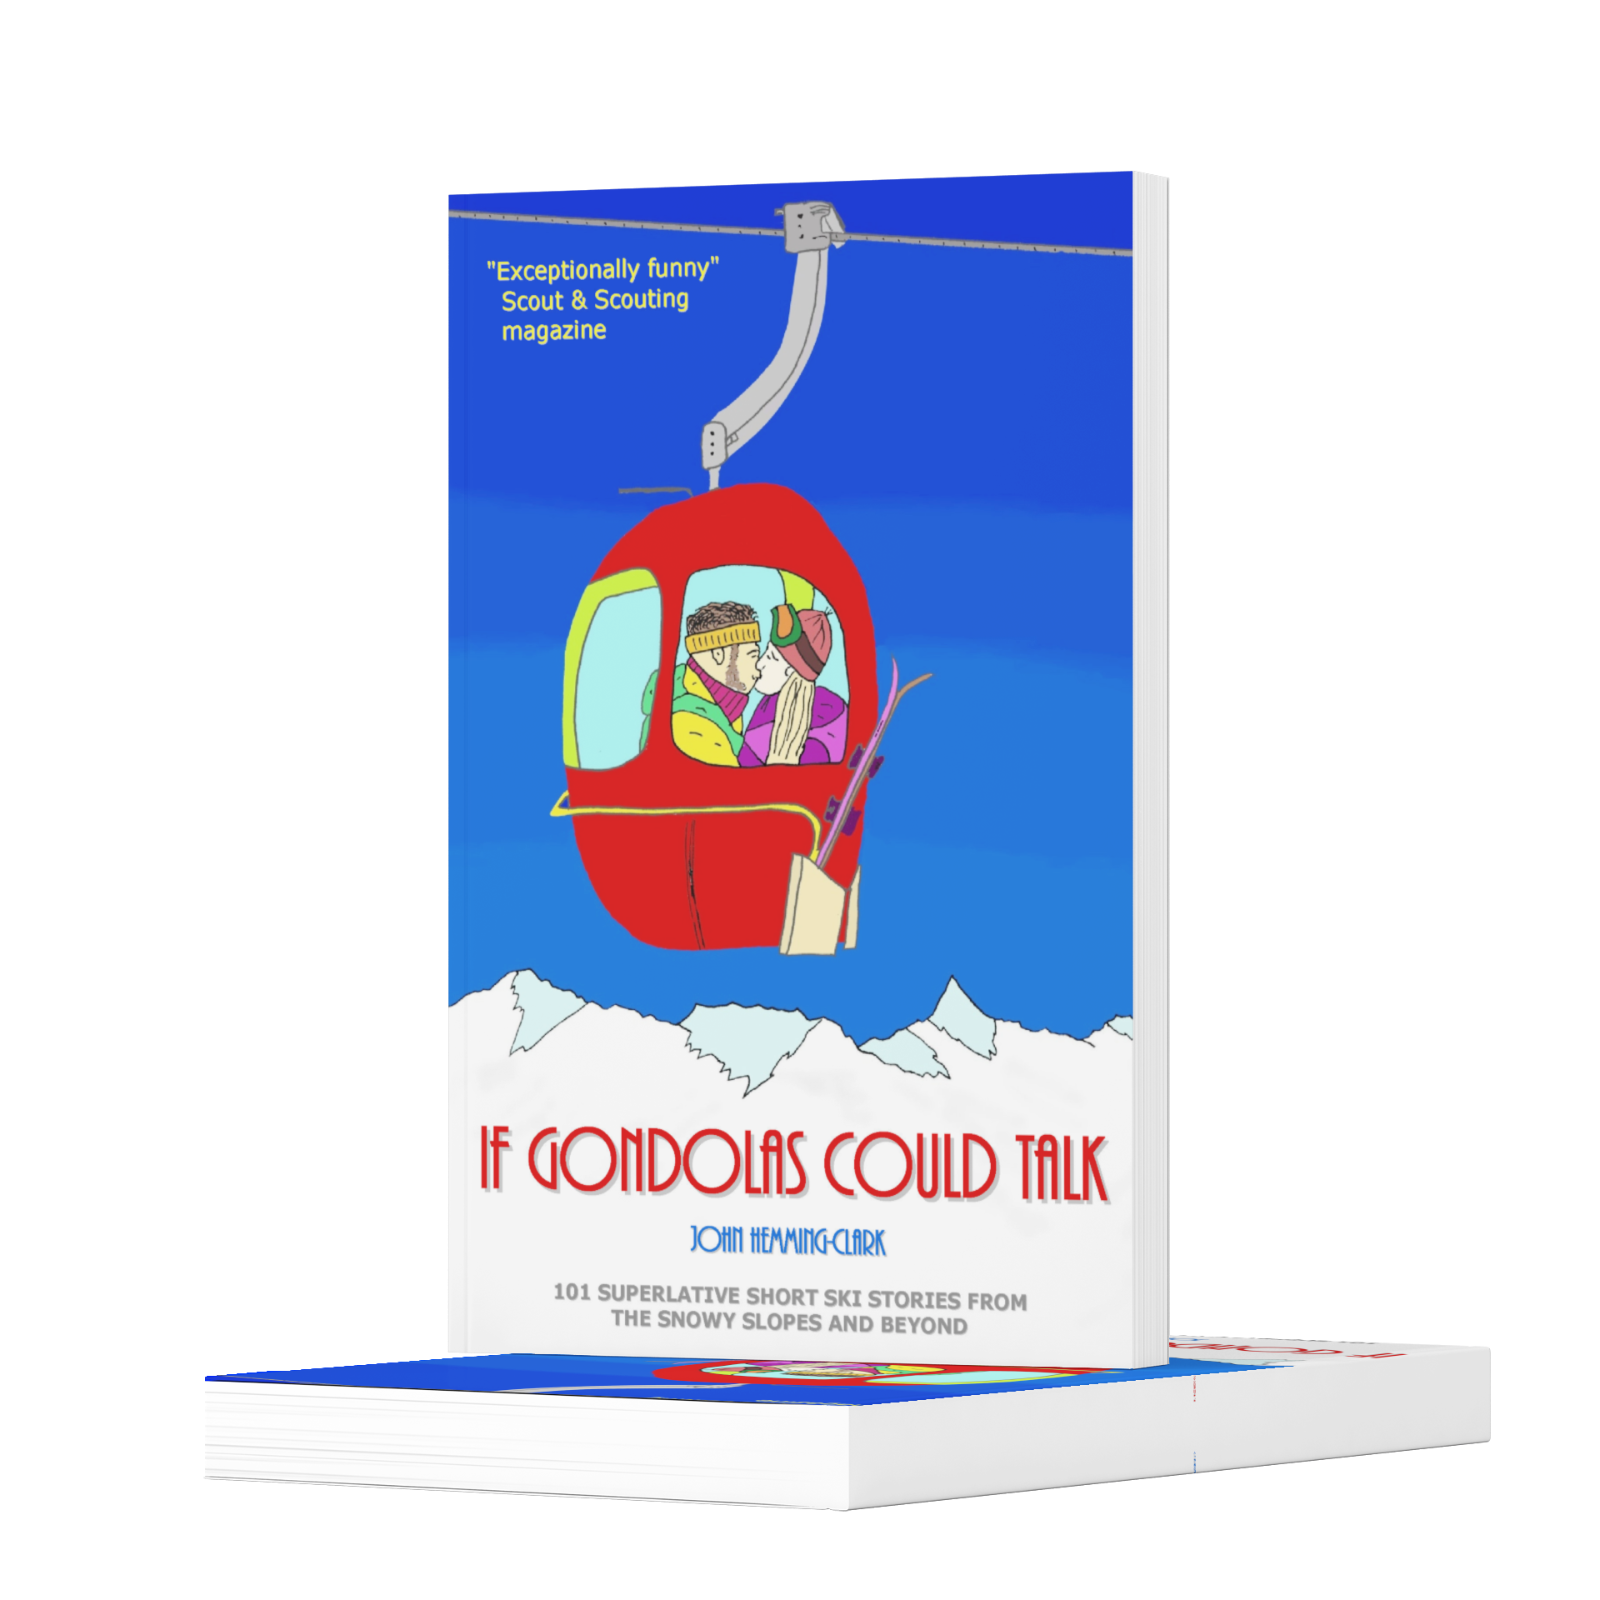 Book cover showing a red gondola with a couple inside kissing, above a snow capped mountain and blue sky, resting on top of the same book